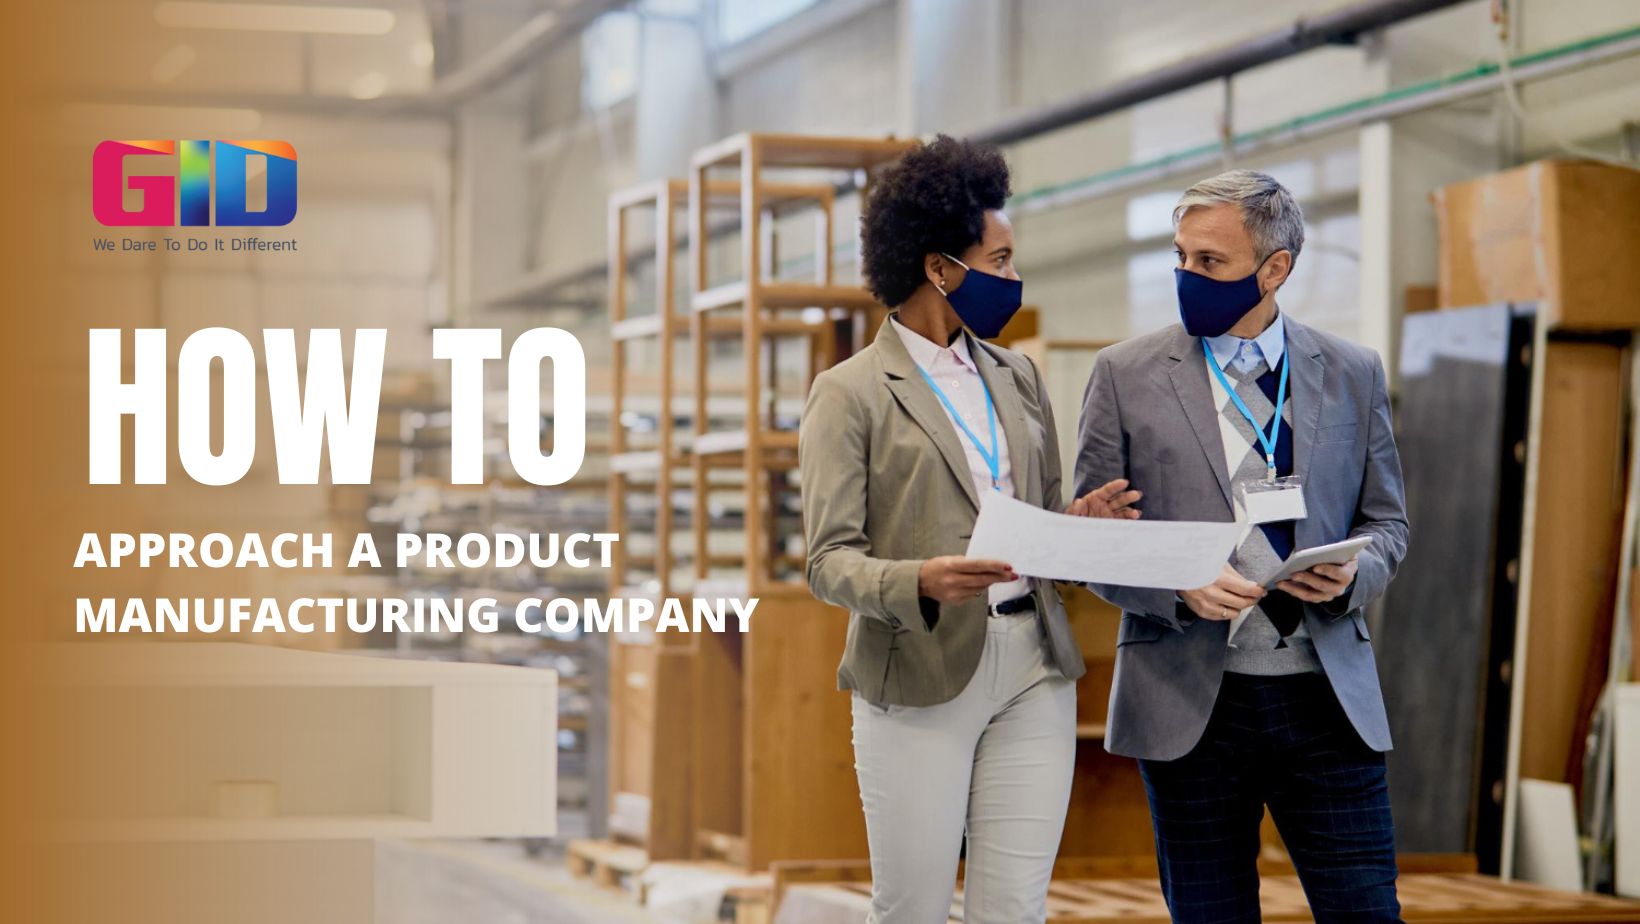 How to Approach a Product Manufacturing Company - GID Company